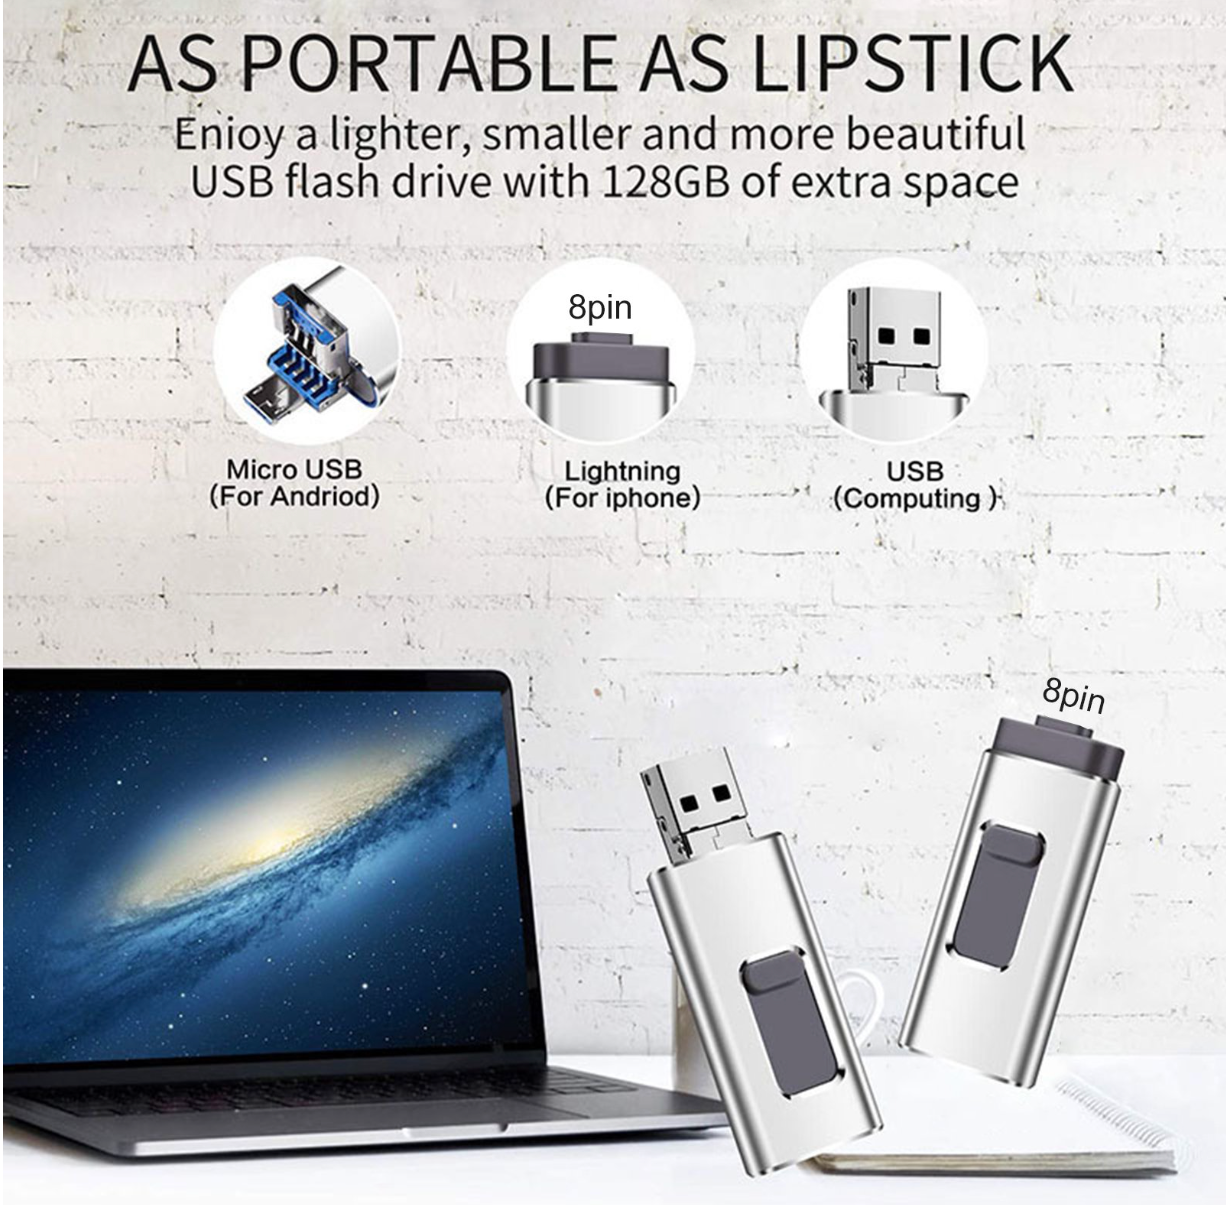 3in1 USB 3.0 Flash Drive 128GB🔥 Last Day Special Sale 26% OFF 🔥